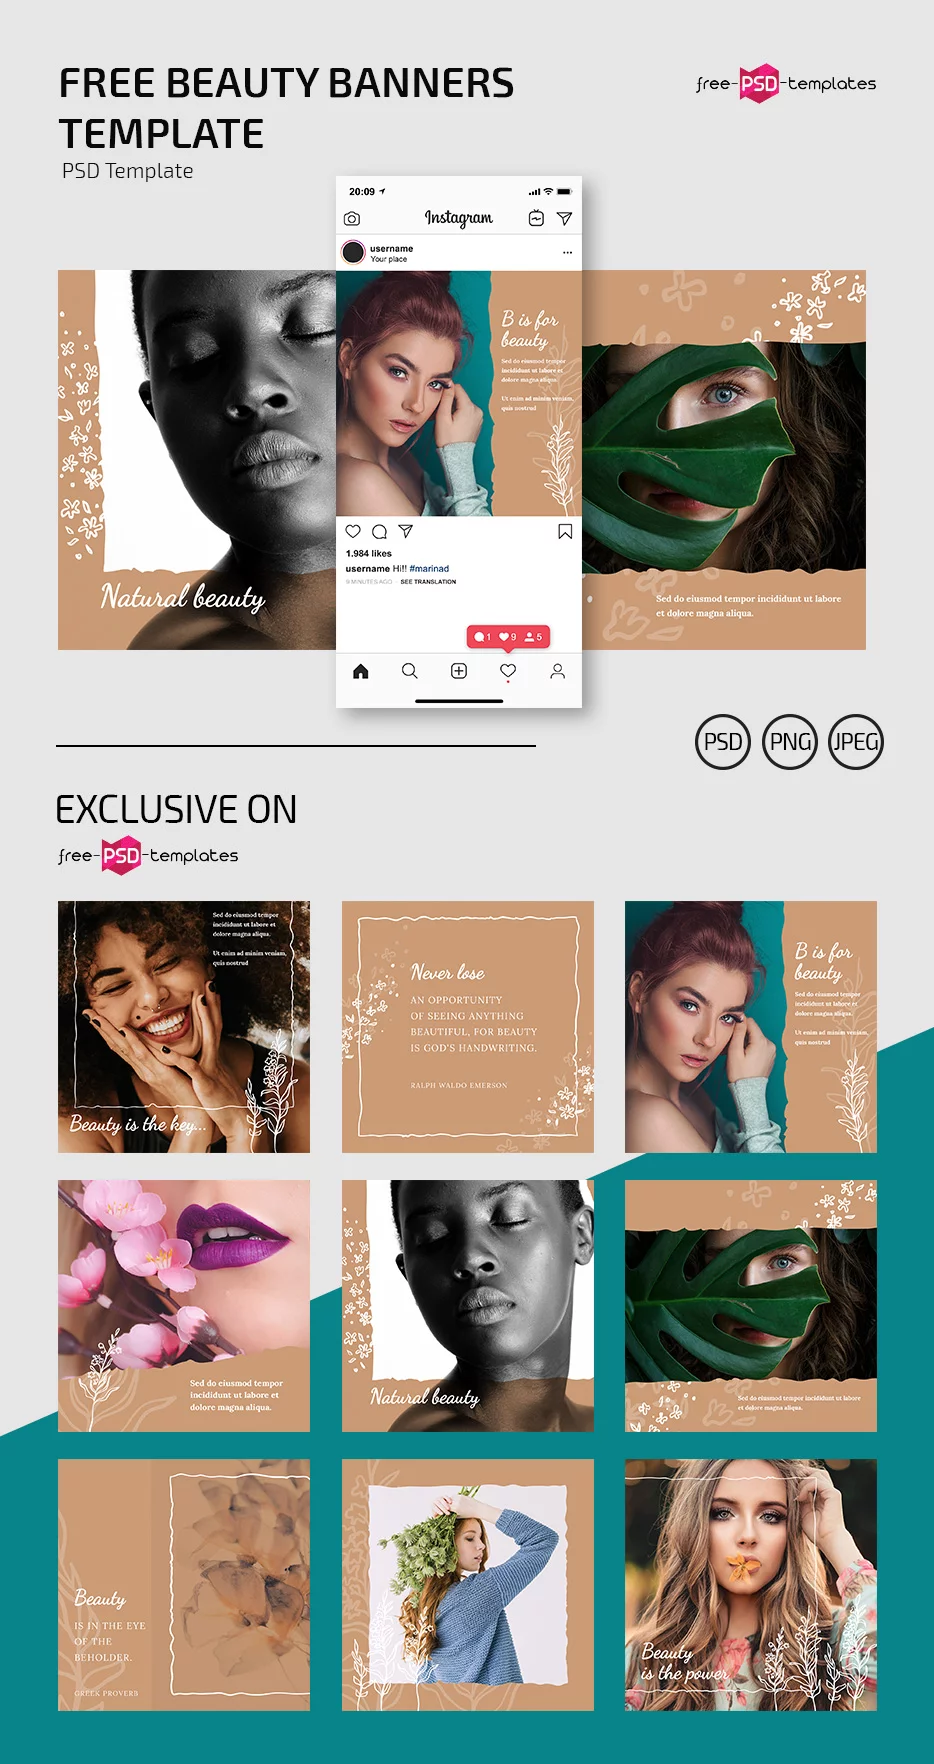 Free Beauty Banners Template